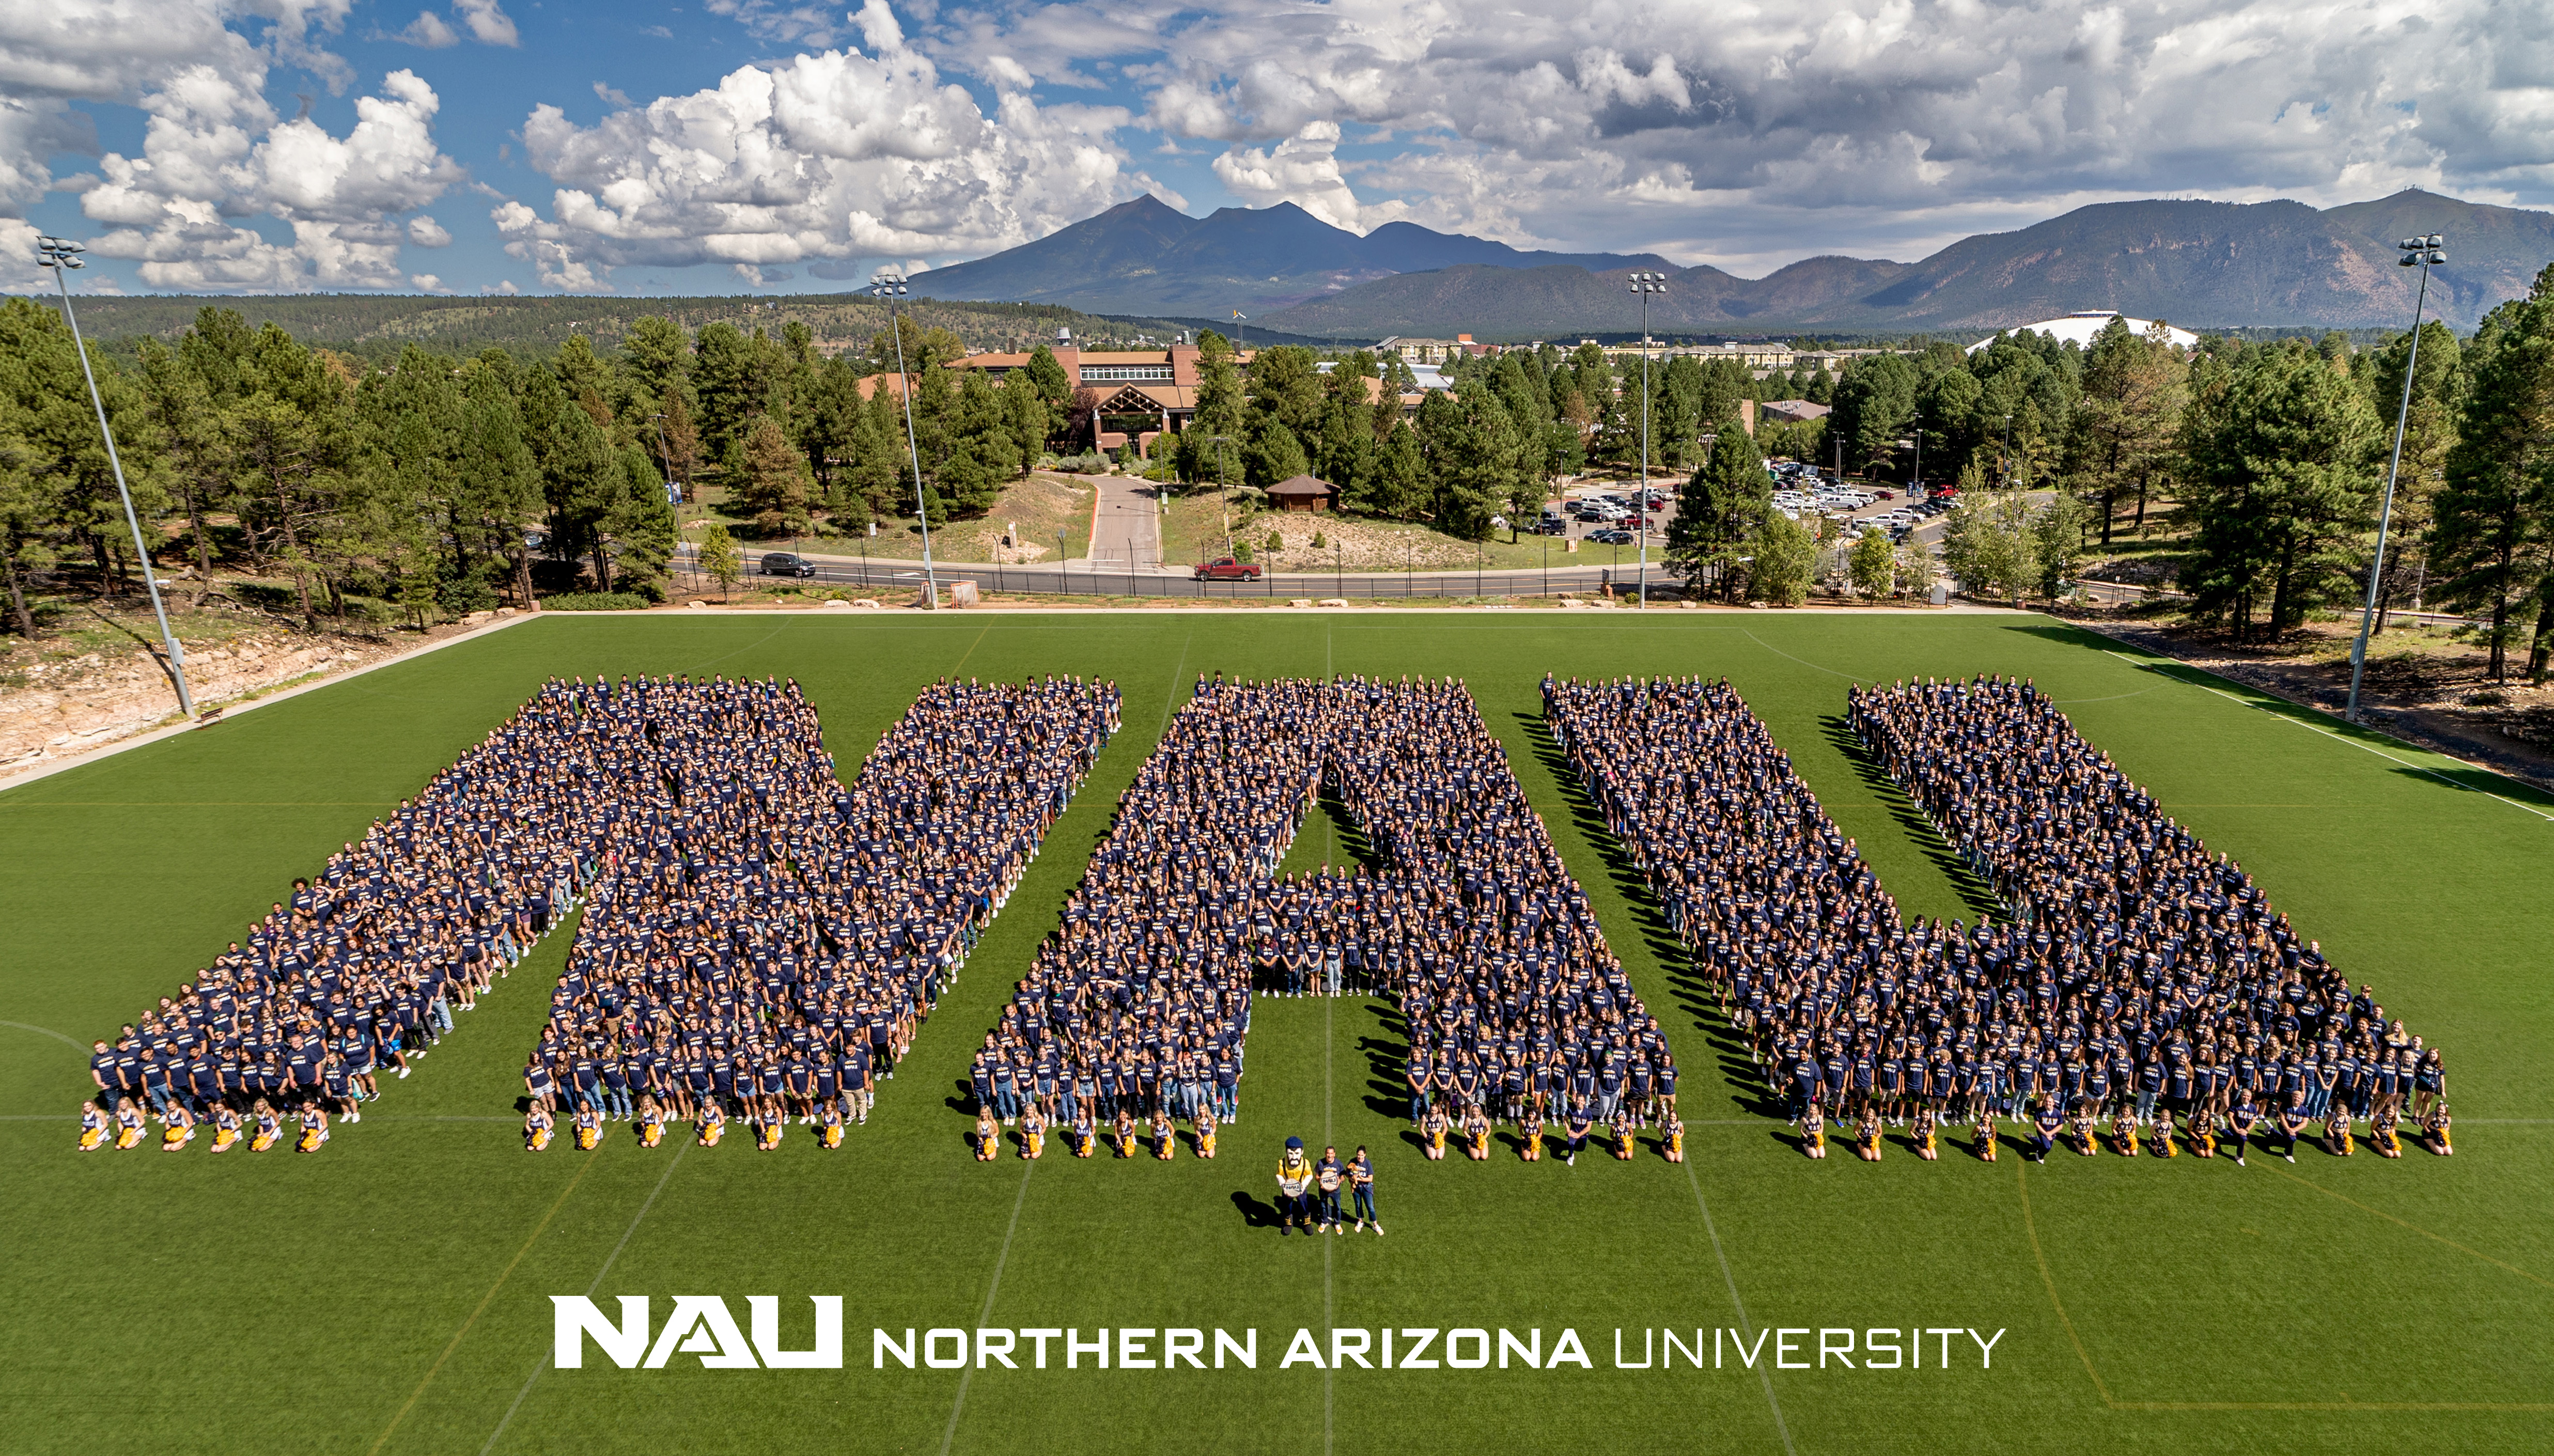 Thousands of students standing on a football field in the shape of NAU letters.